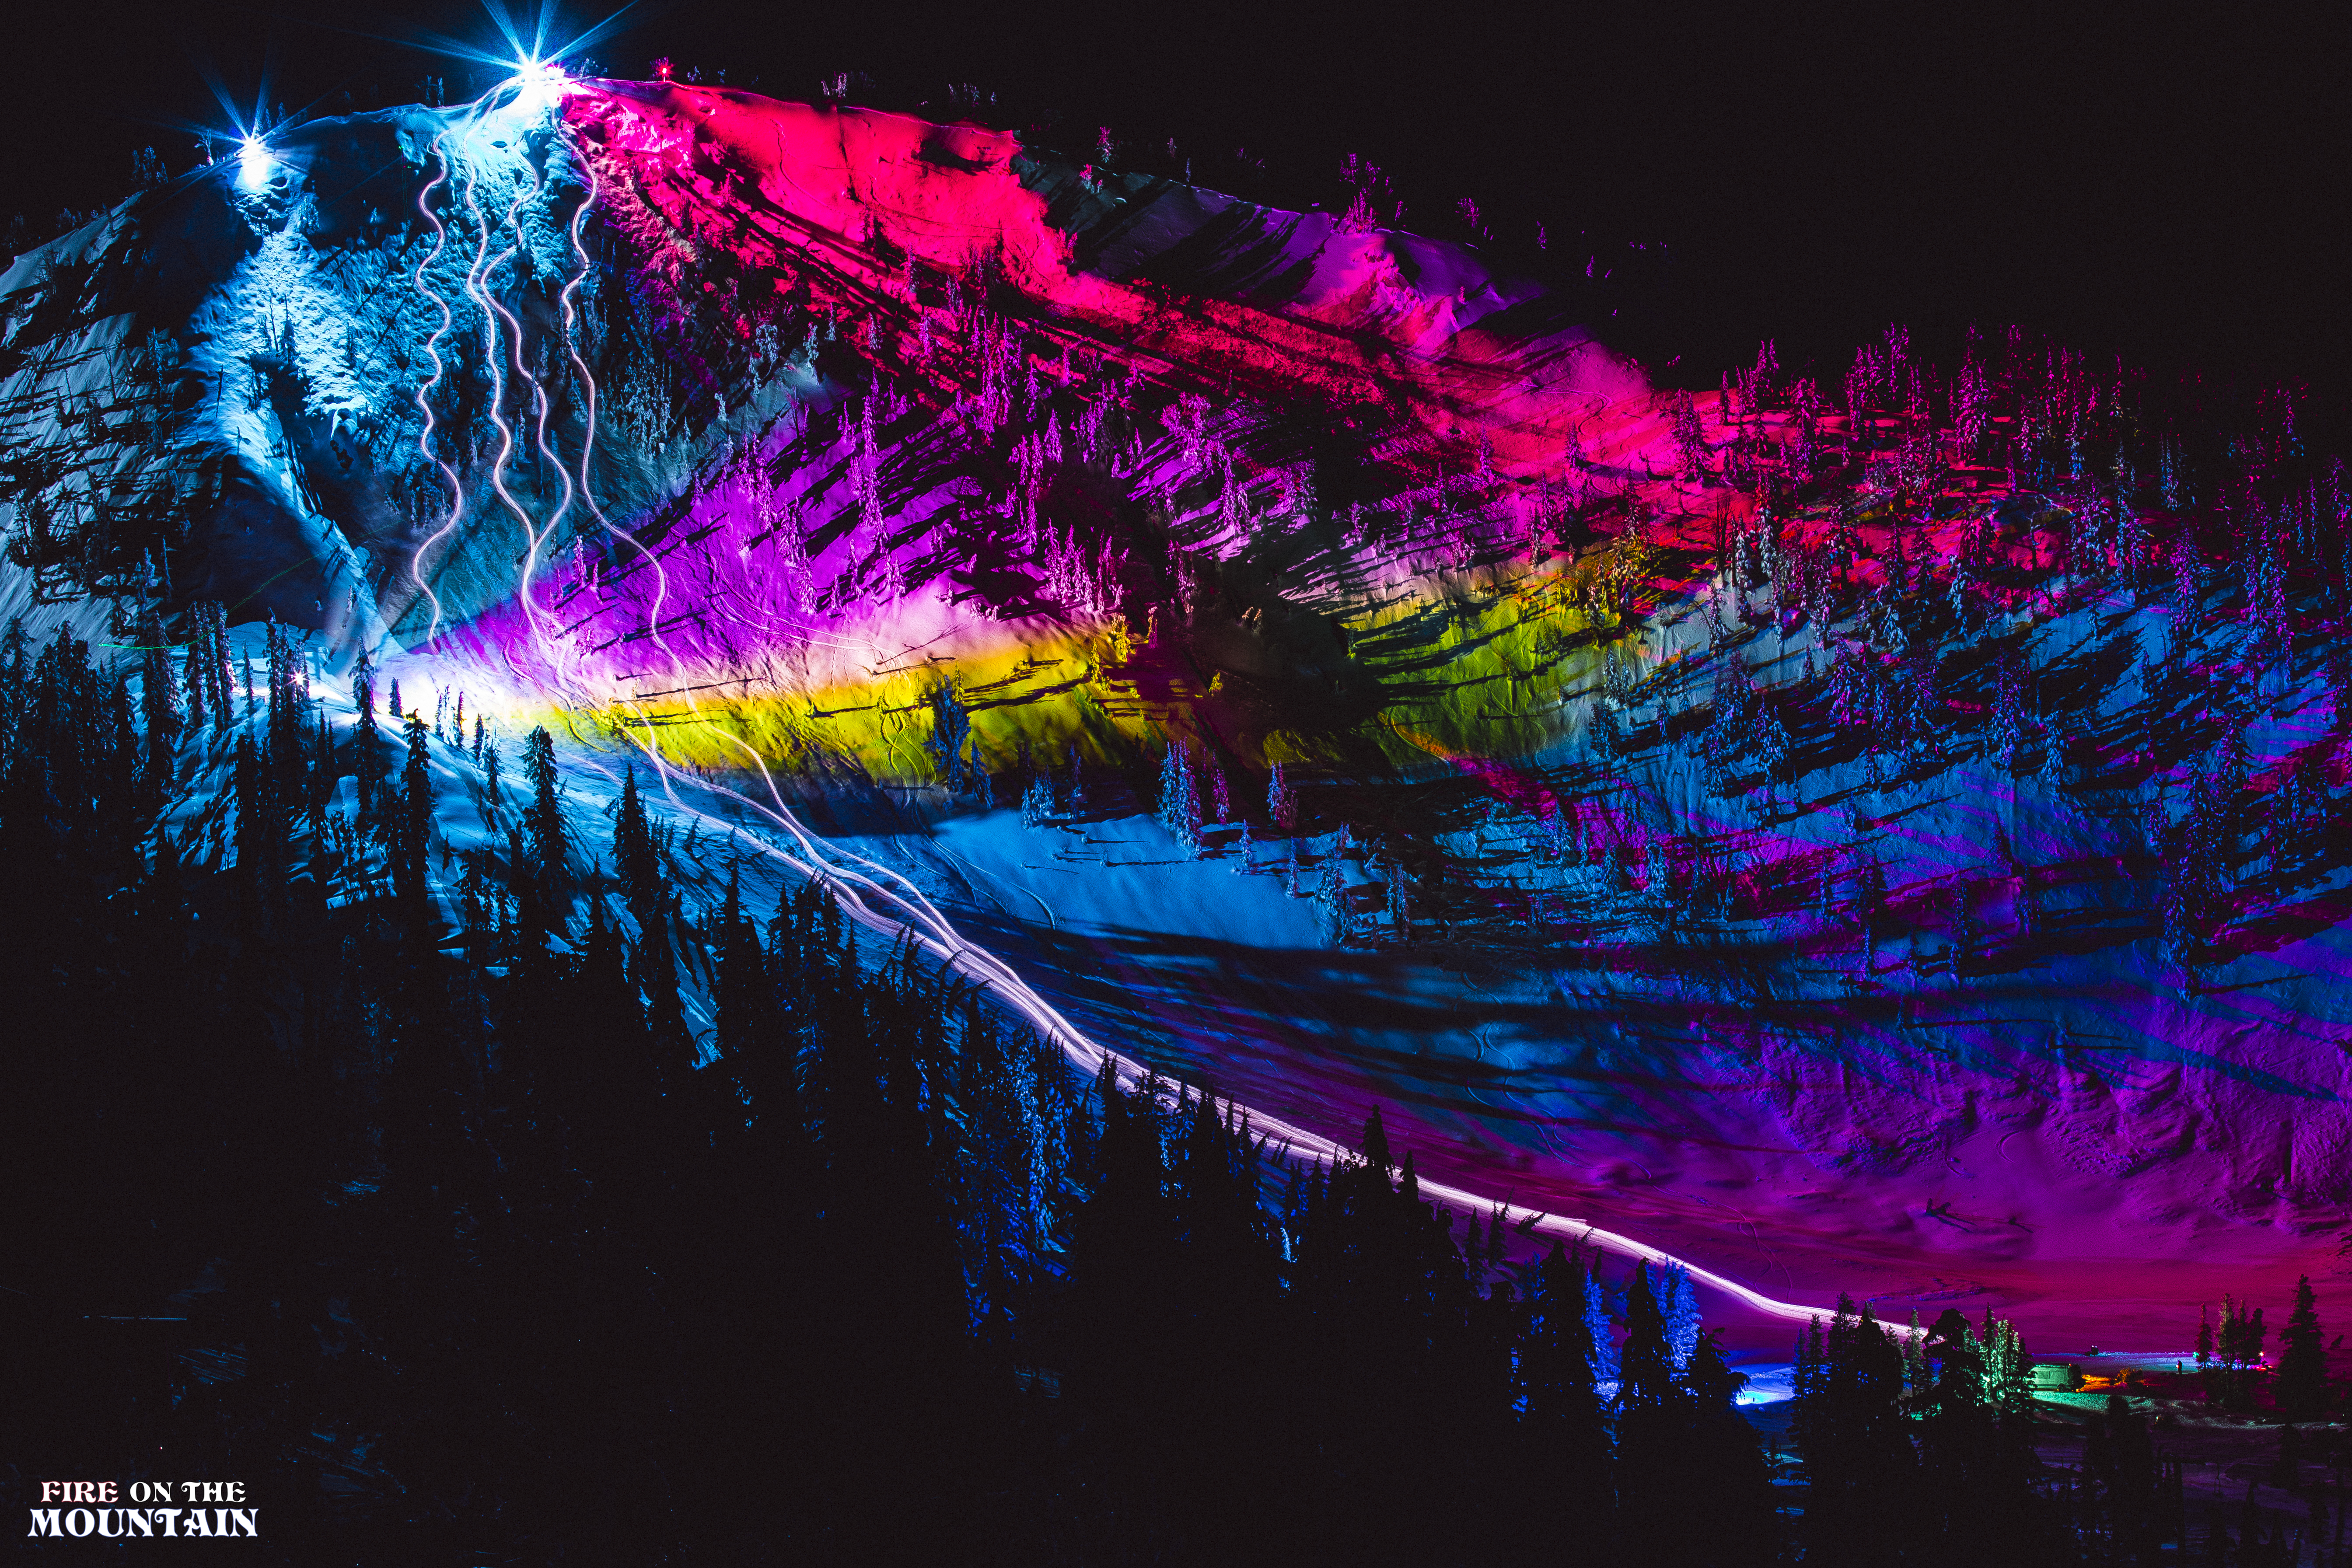 "Fire On The Mountain" is a visual journey blending action sports, art, and music.